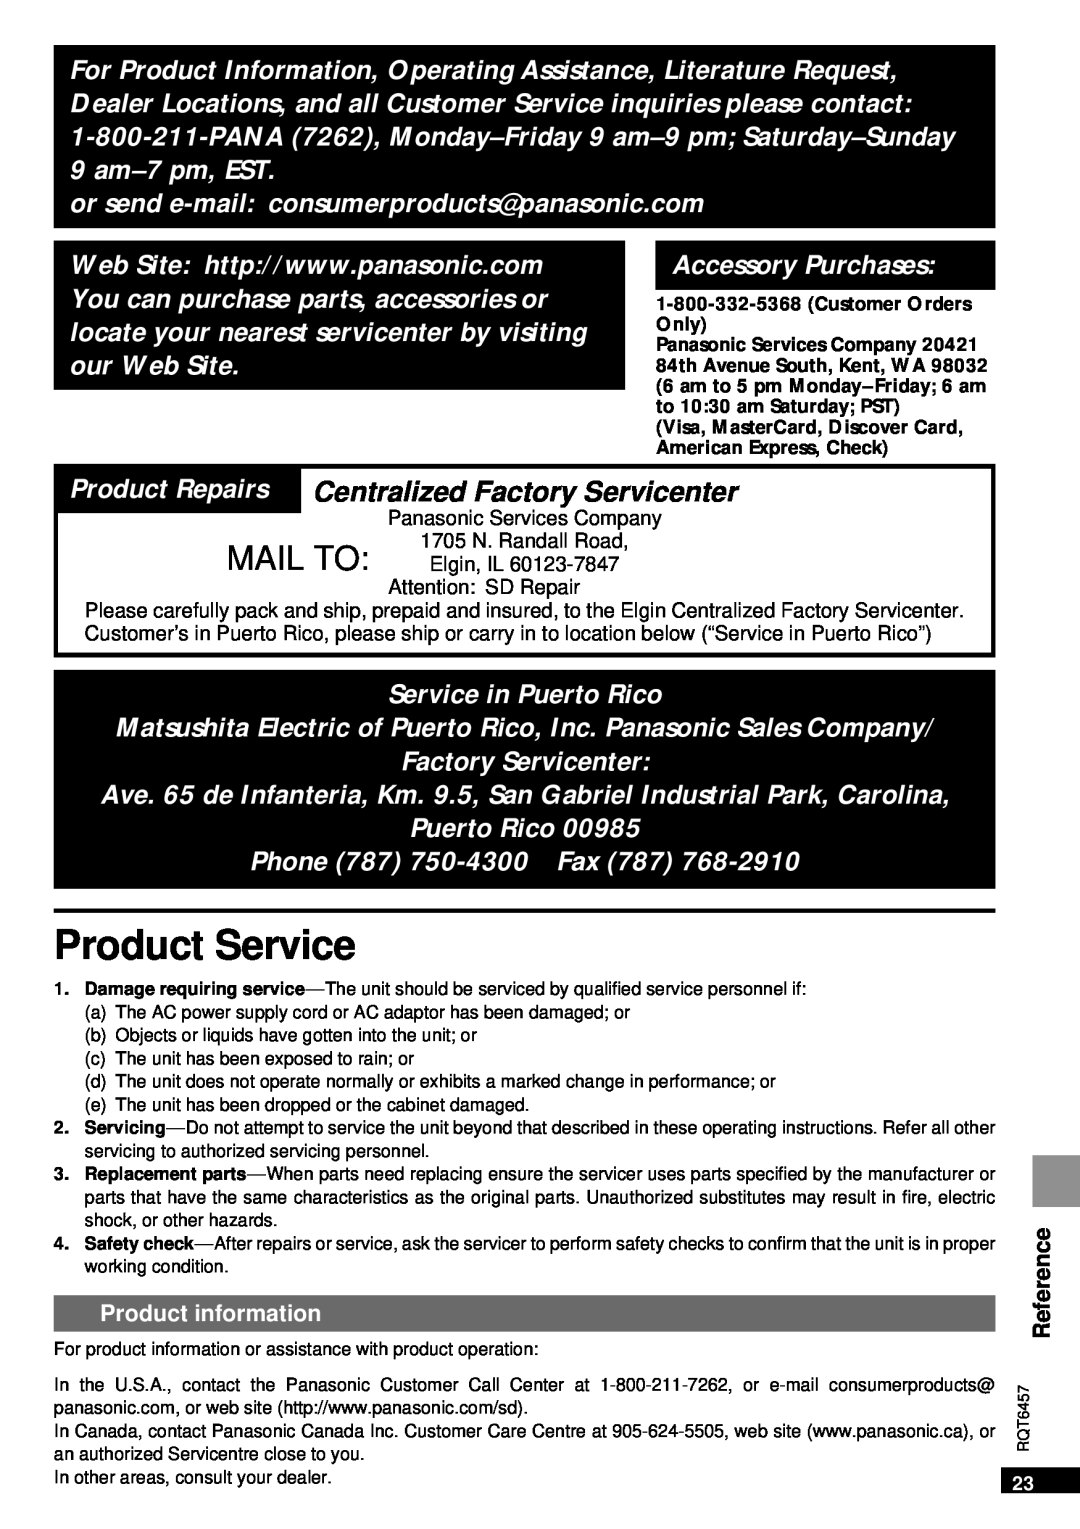 Panasonic SV-SR100 operating instructions Product Service, Mail To, Centralized Factory Servicenter 